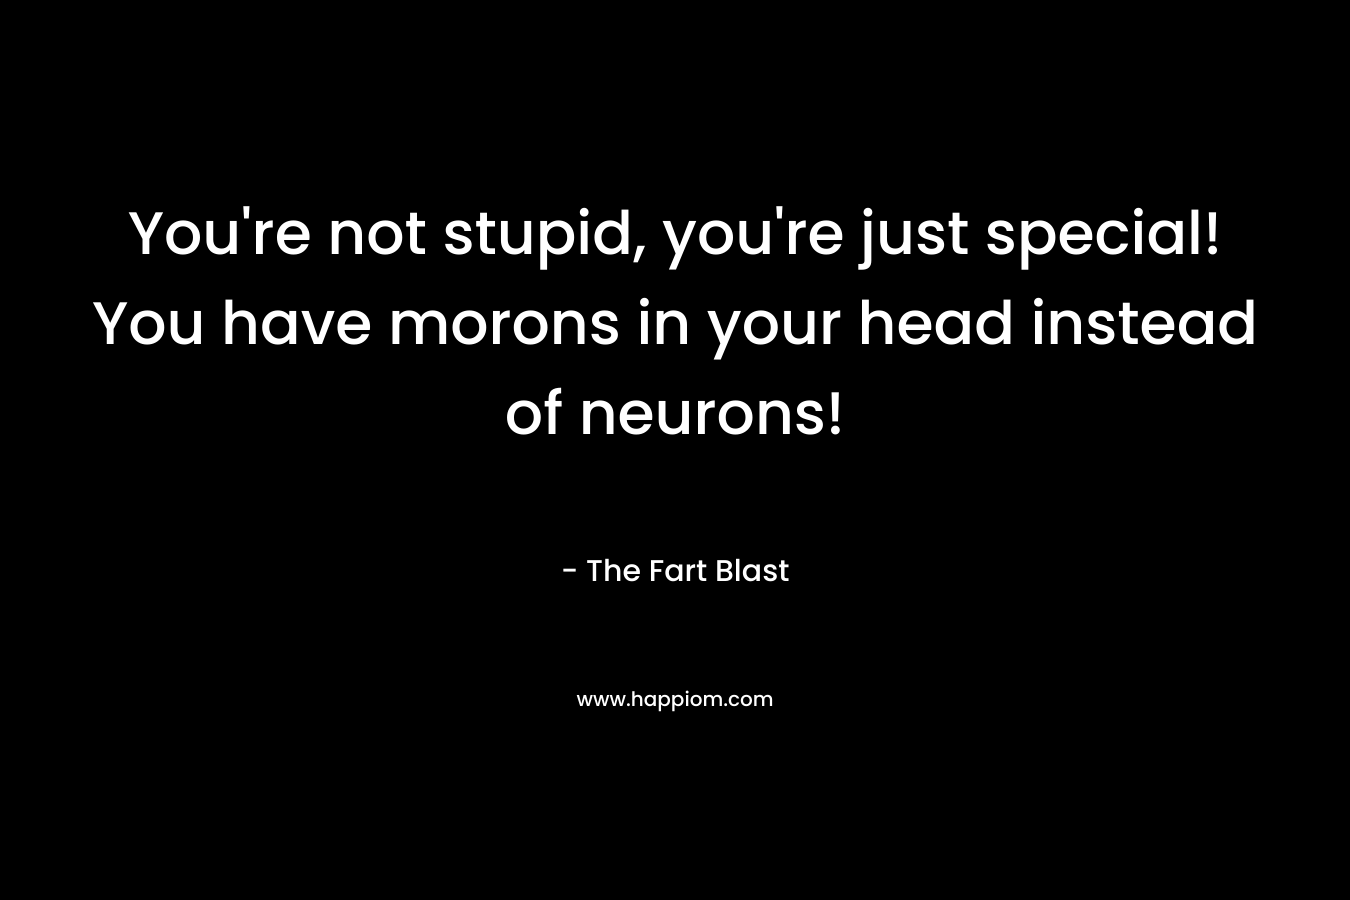 You're not stupid, you're just special! You have morons in your head instead of neurons!